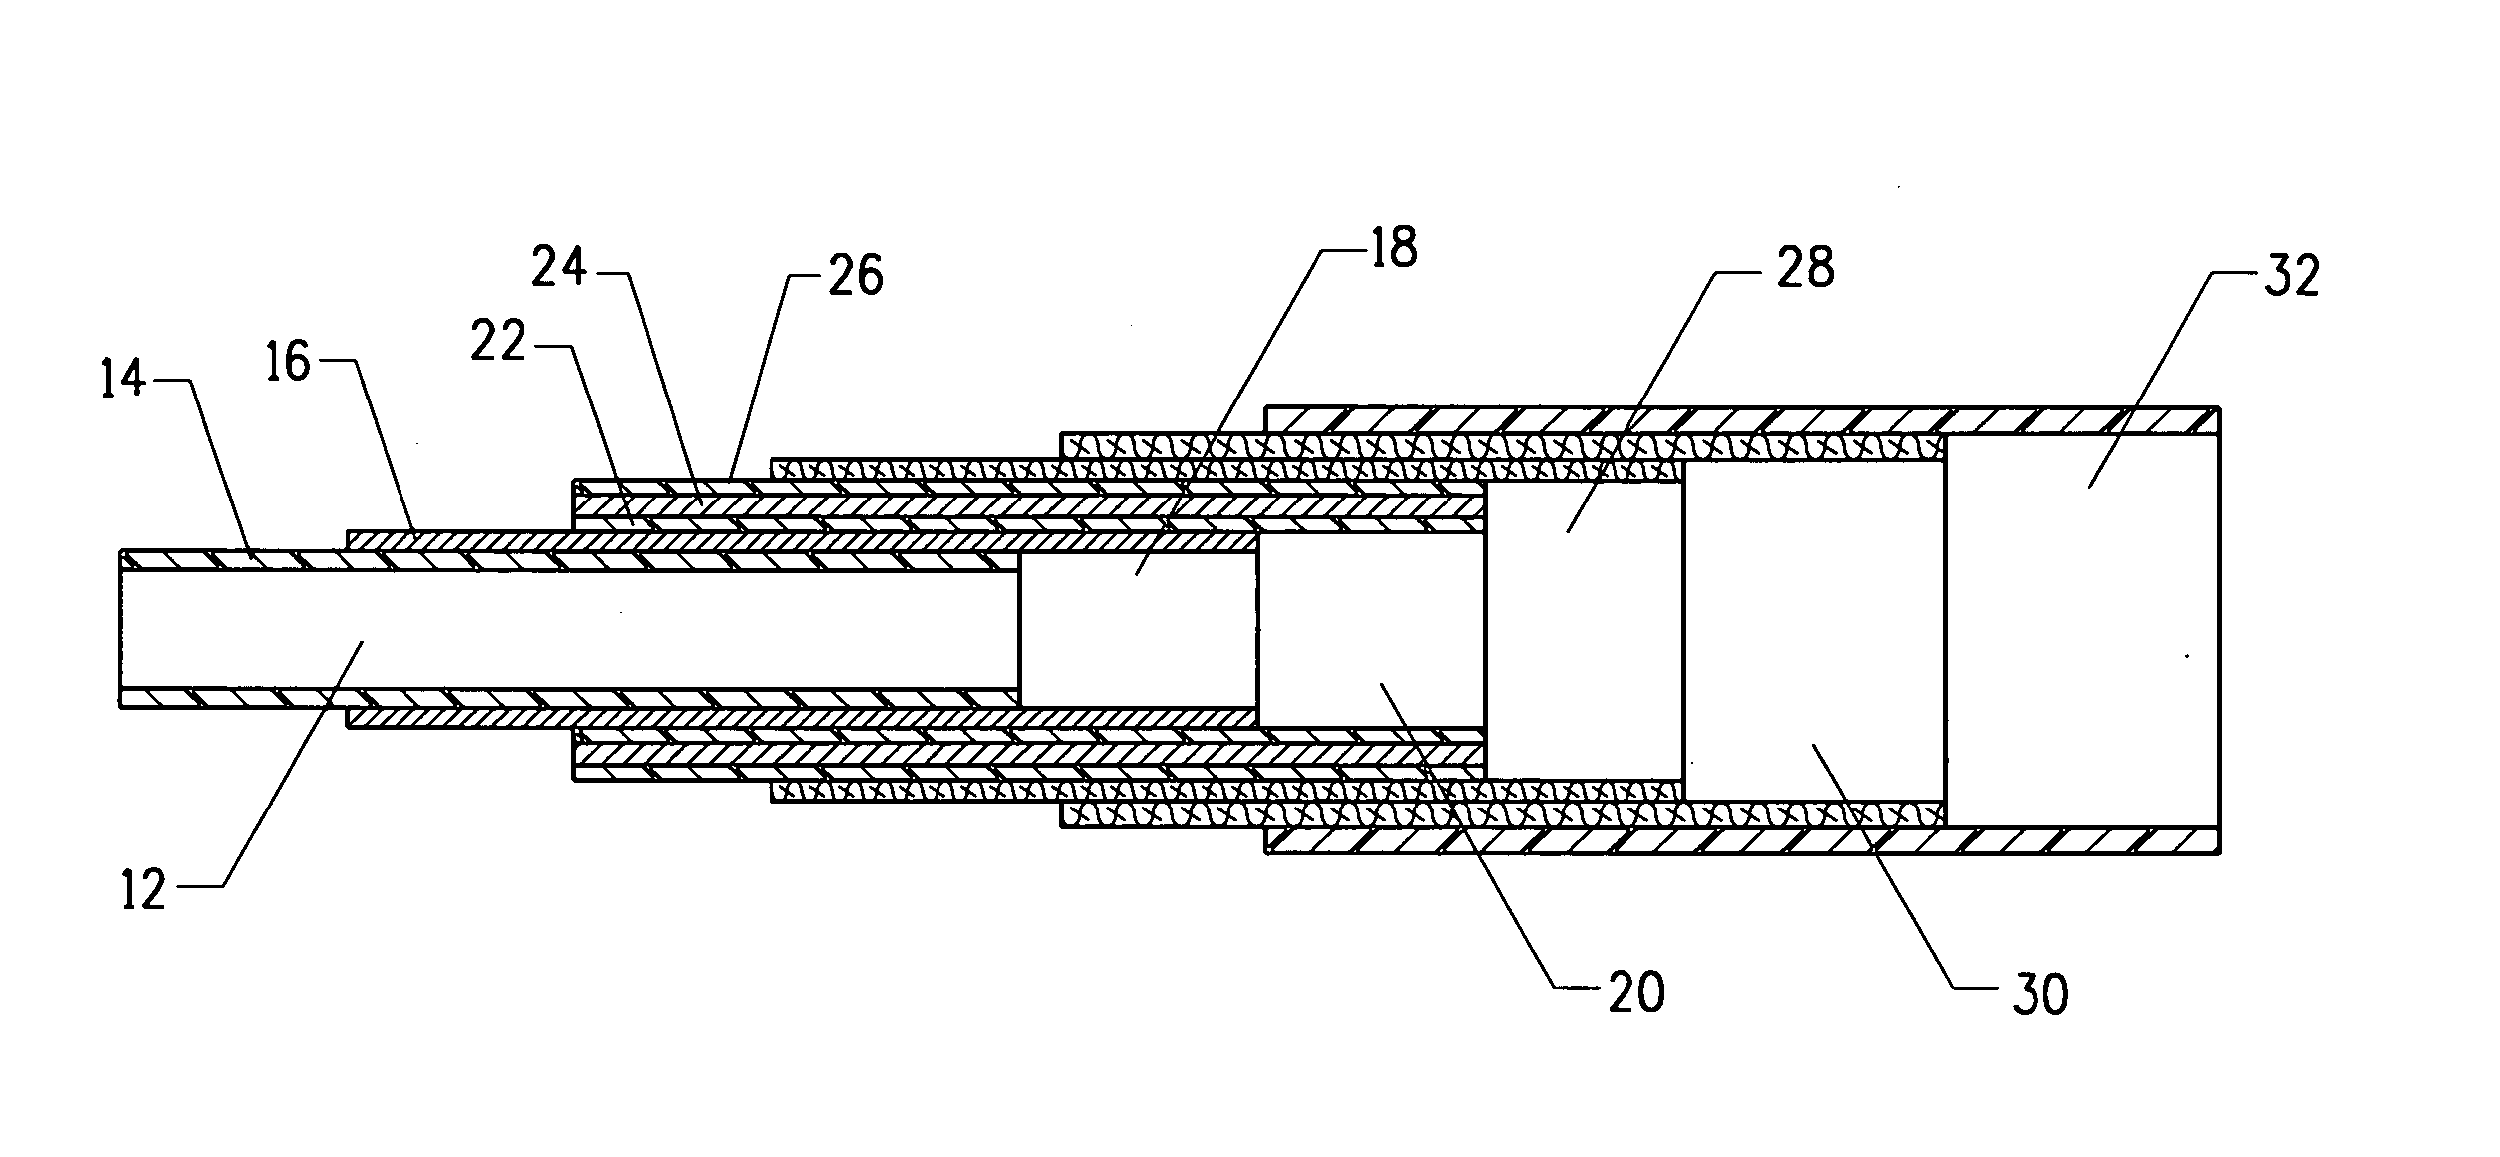 Method for circulating select heat transfer fluids through closed loop cycles, incorporating high pressure barrier hoses